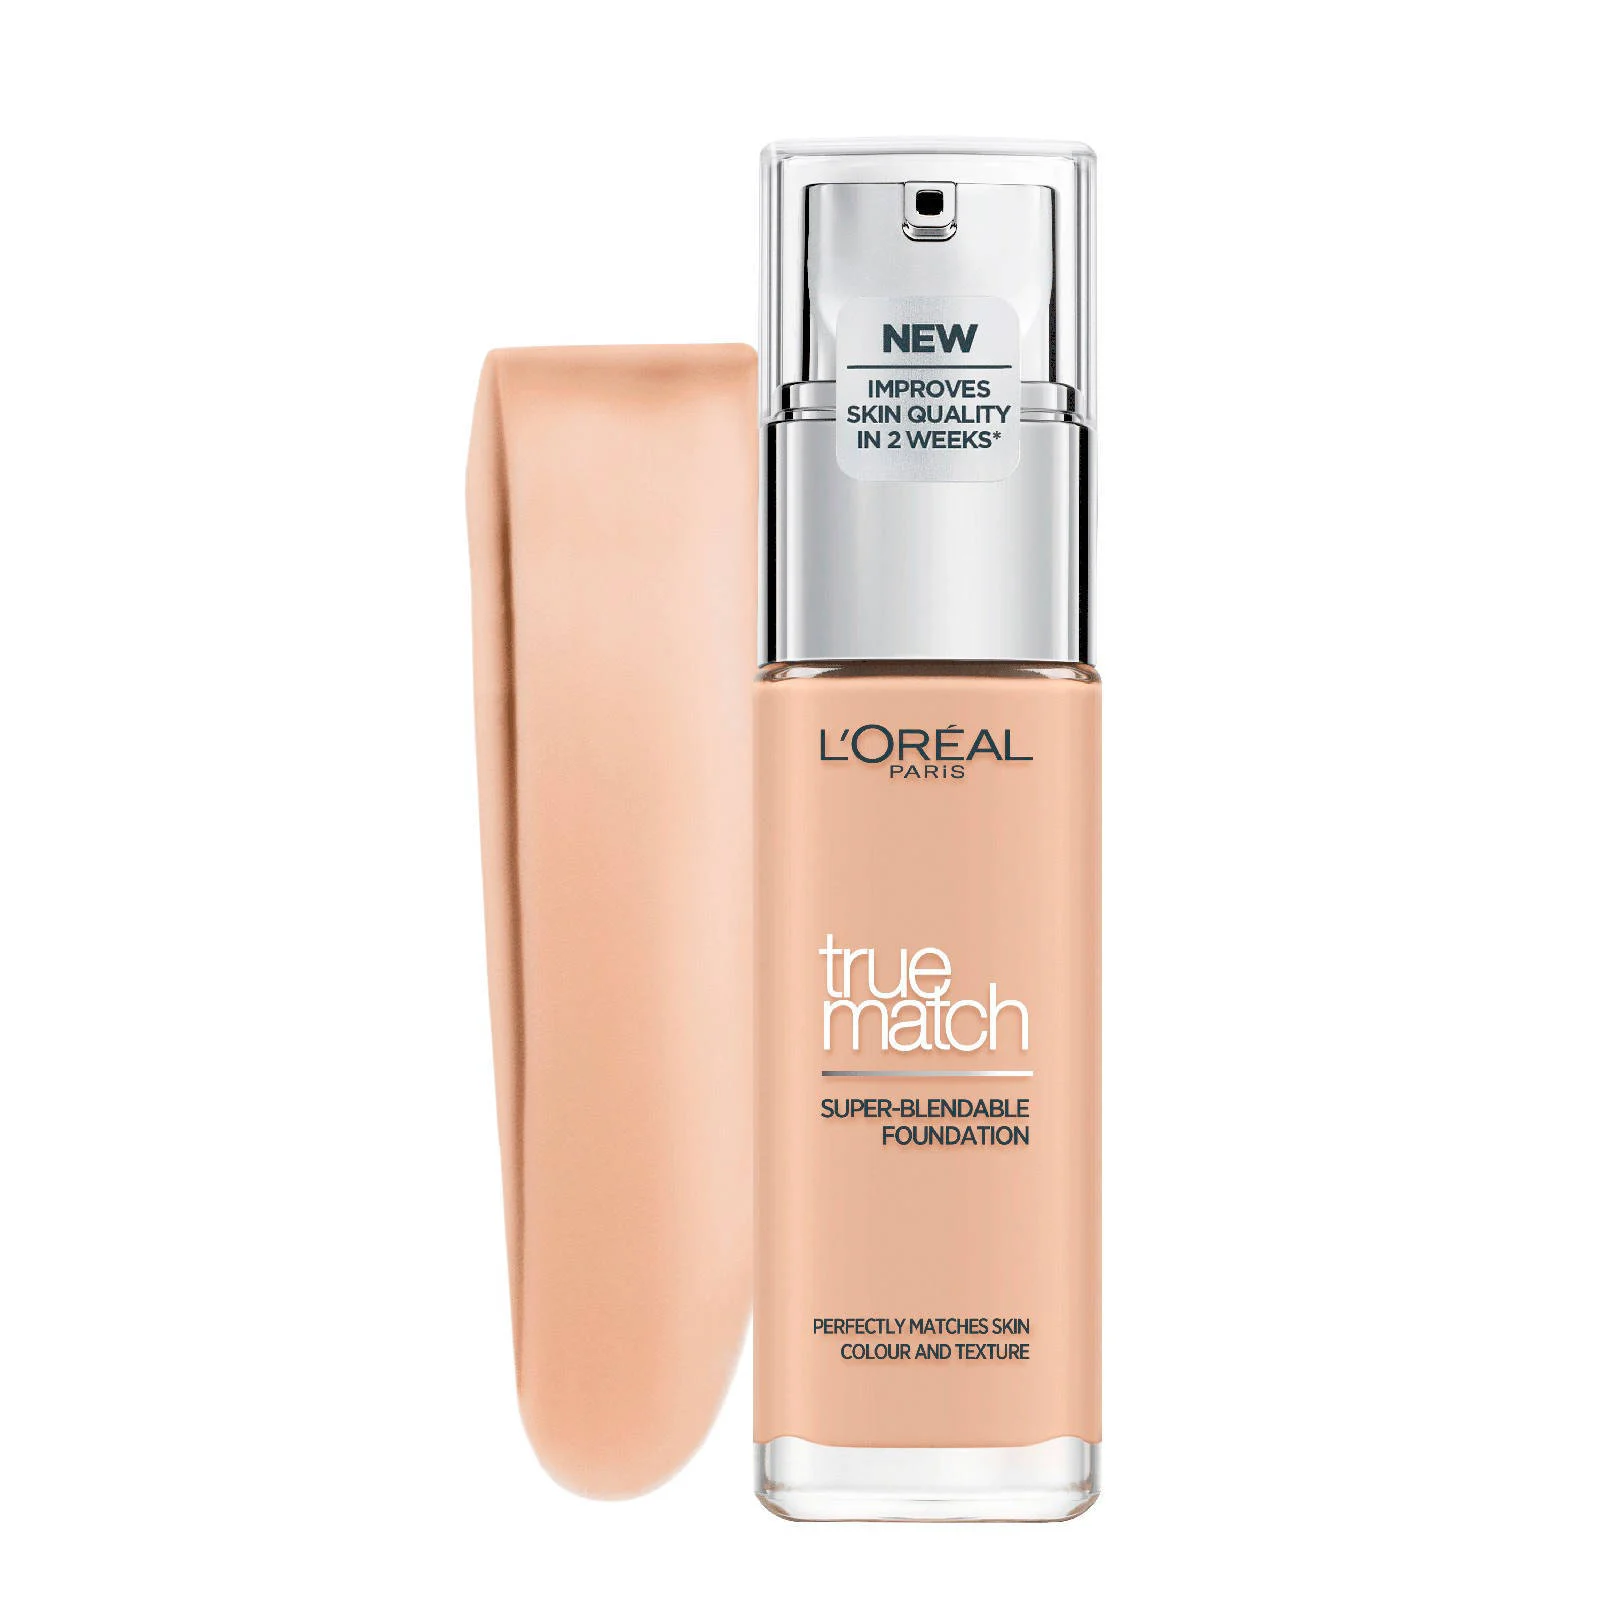 L’Oreal Paris True Match Super-Blendable Foundation: A Spectrum of Beauty for Every Shade